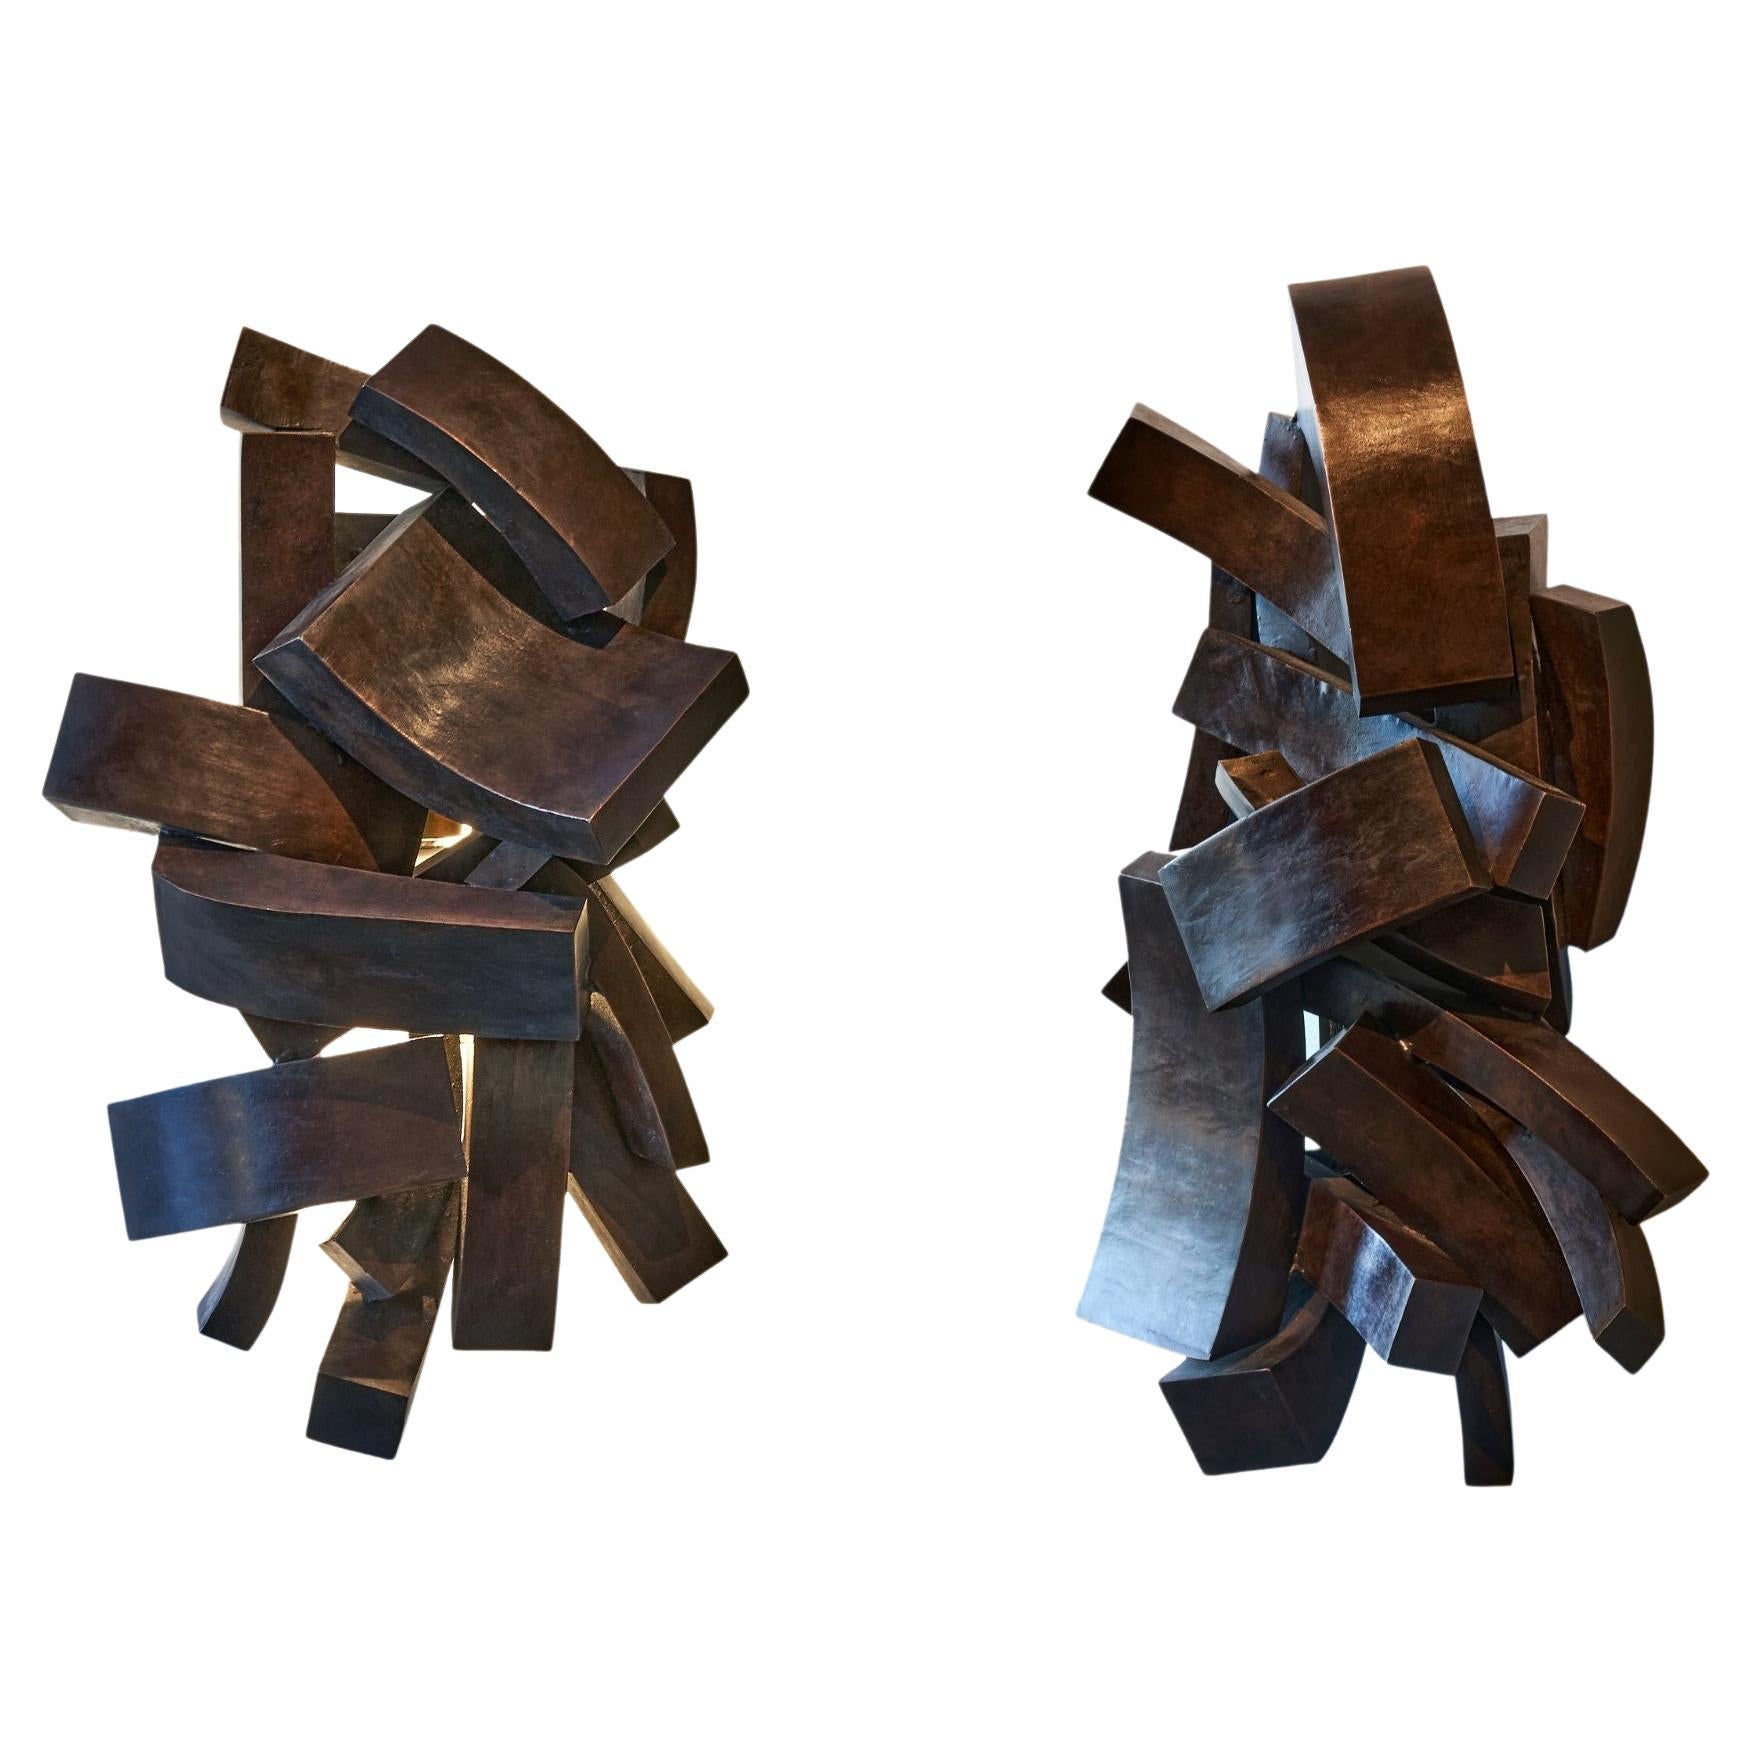 "Timbuctu" Pair of Wall Sconces by Cees Rombout For Sale